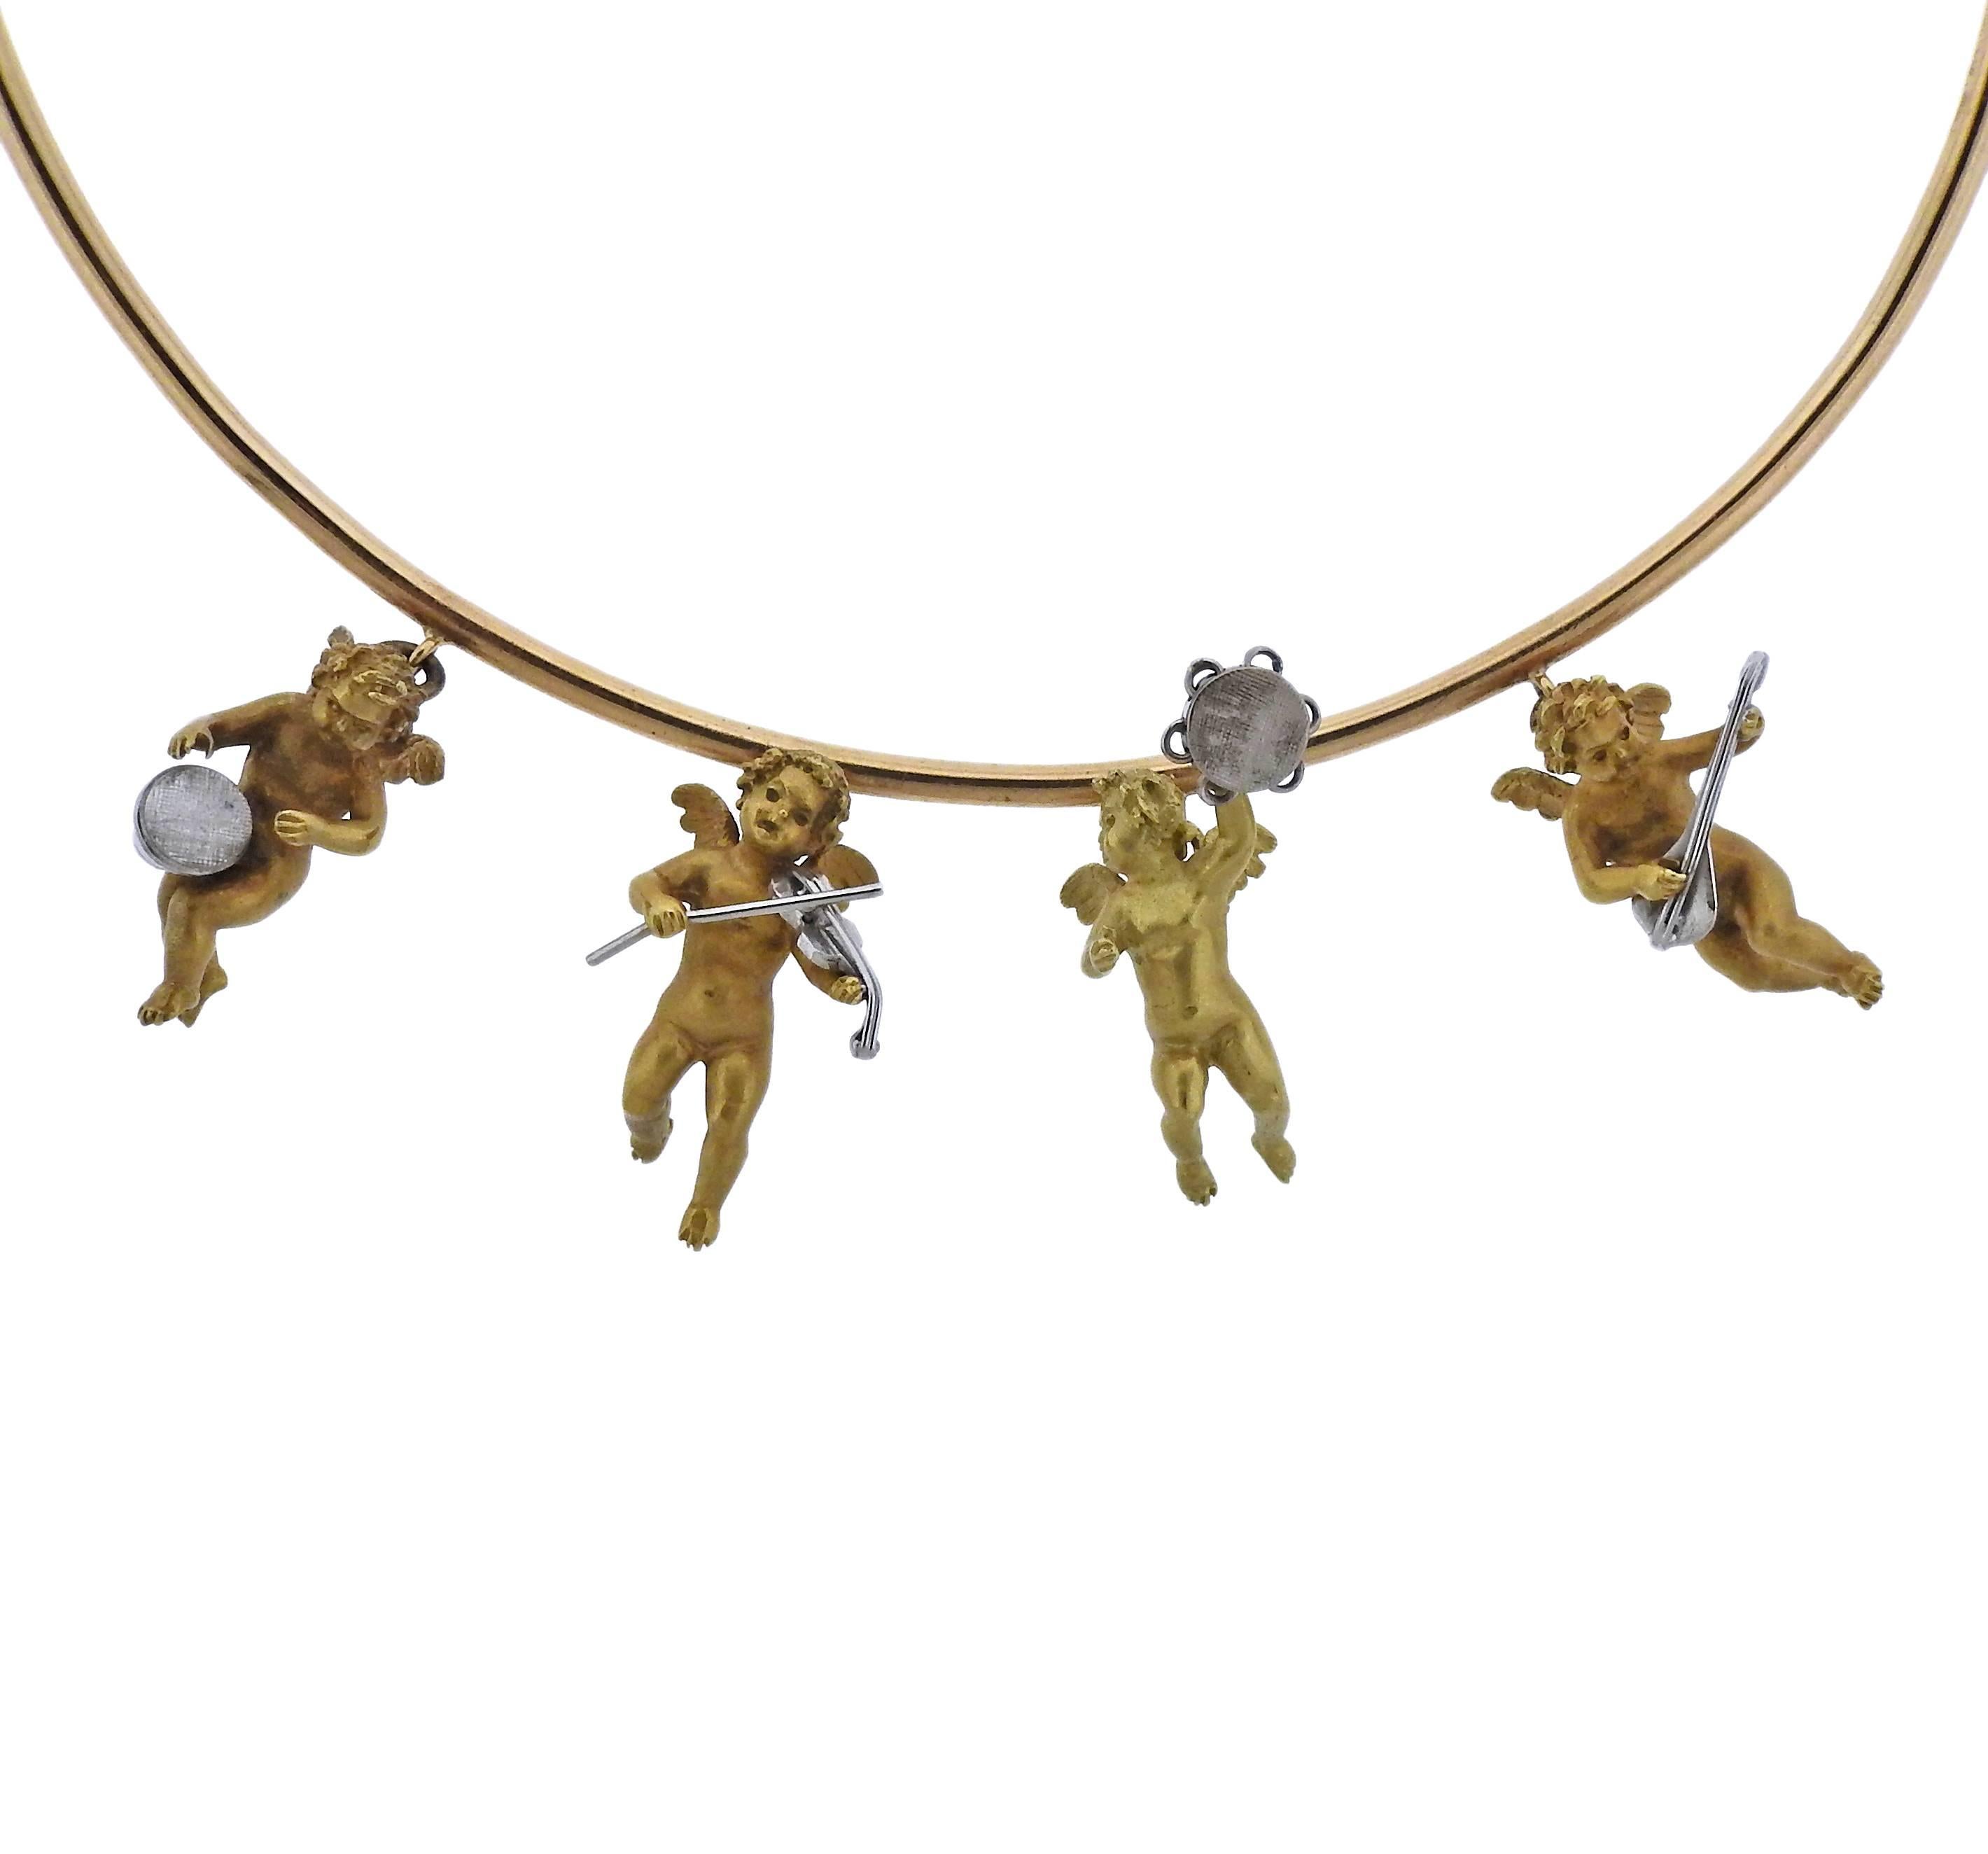  18k yellow gold necklace, featuring four cherub charms.  Inner circumference of the necklace - 14 inches,  each cherub's overall size - 25mm x 18mm. Weight of the necklace - 71.5 grams. Charms are marked 750 each.